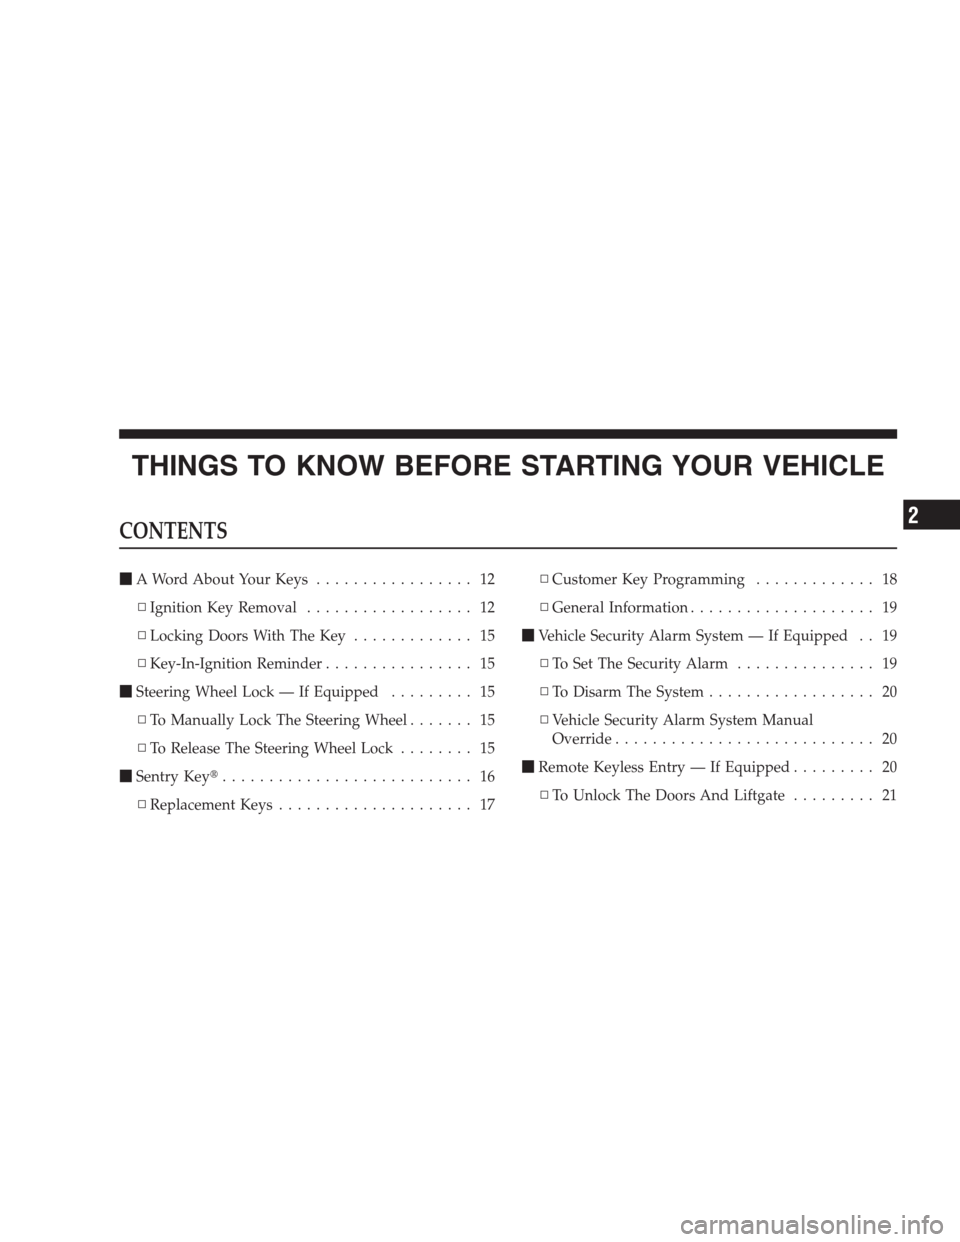 JEEP COMPASS 2009 1.G Owners Manual THINGS TO KNOW BEFORE STARTING YOUR VEHICLE
CONTENTS
A Word About Your Keys................. 12
▫Ignition Key Removal.................. 12
▫Locking Doors With The Key............. 15
▫Key-In-Ig